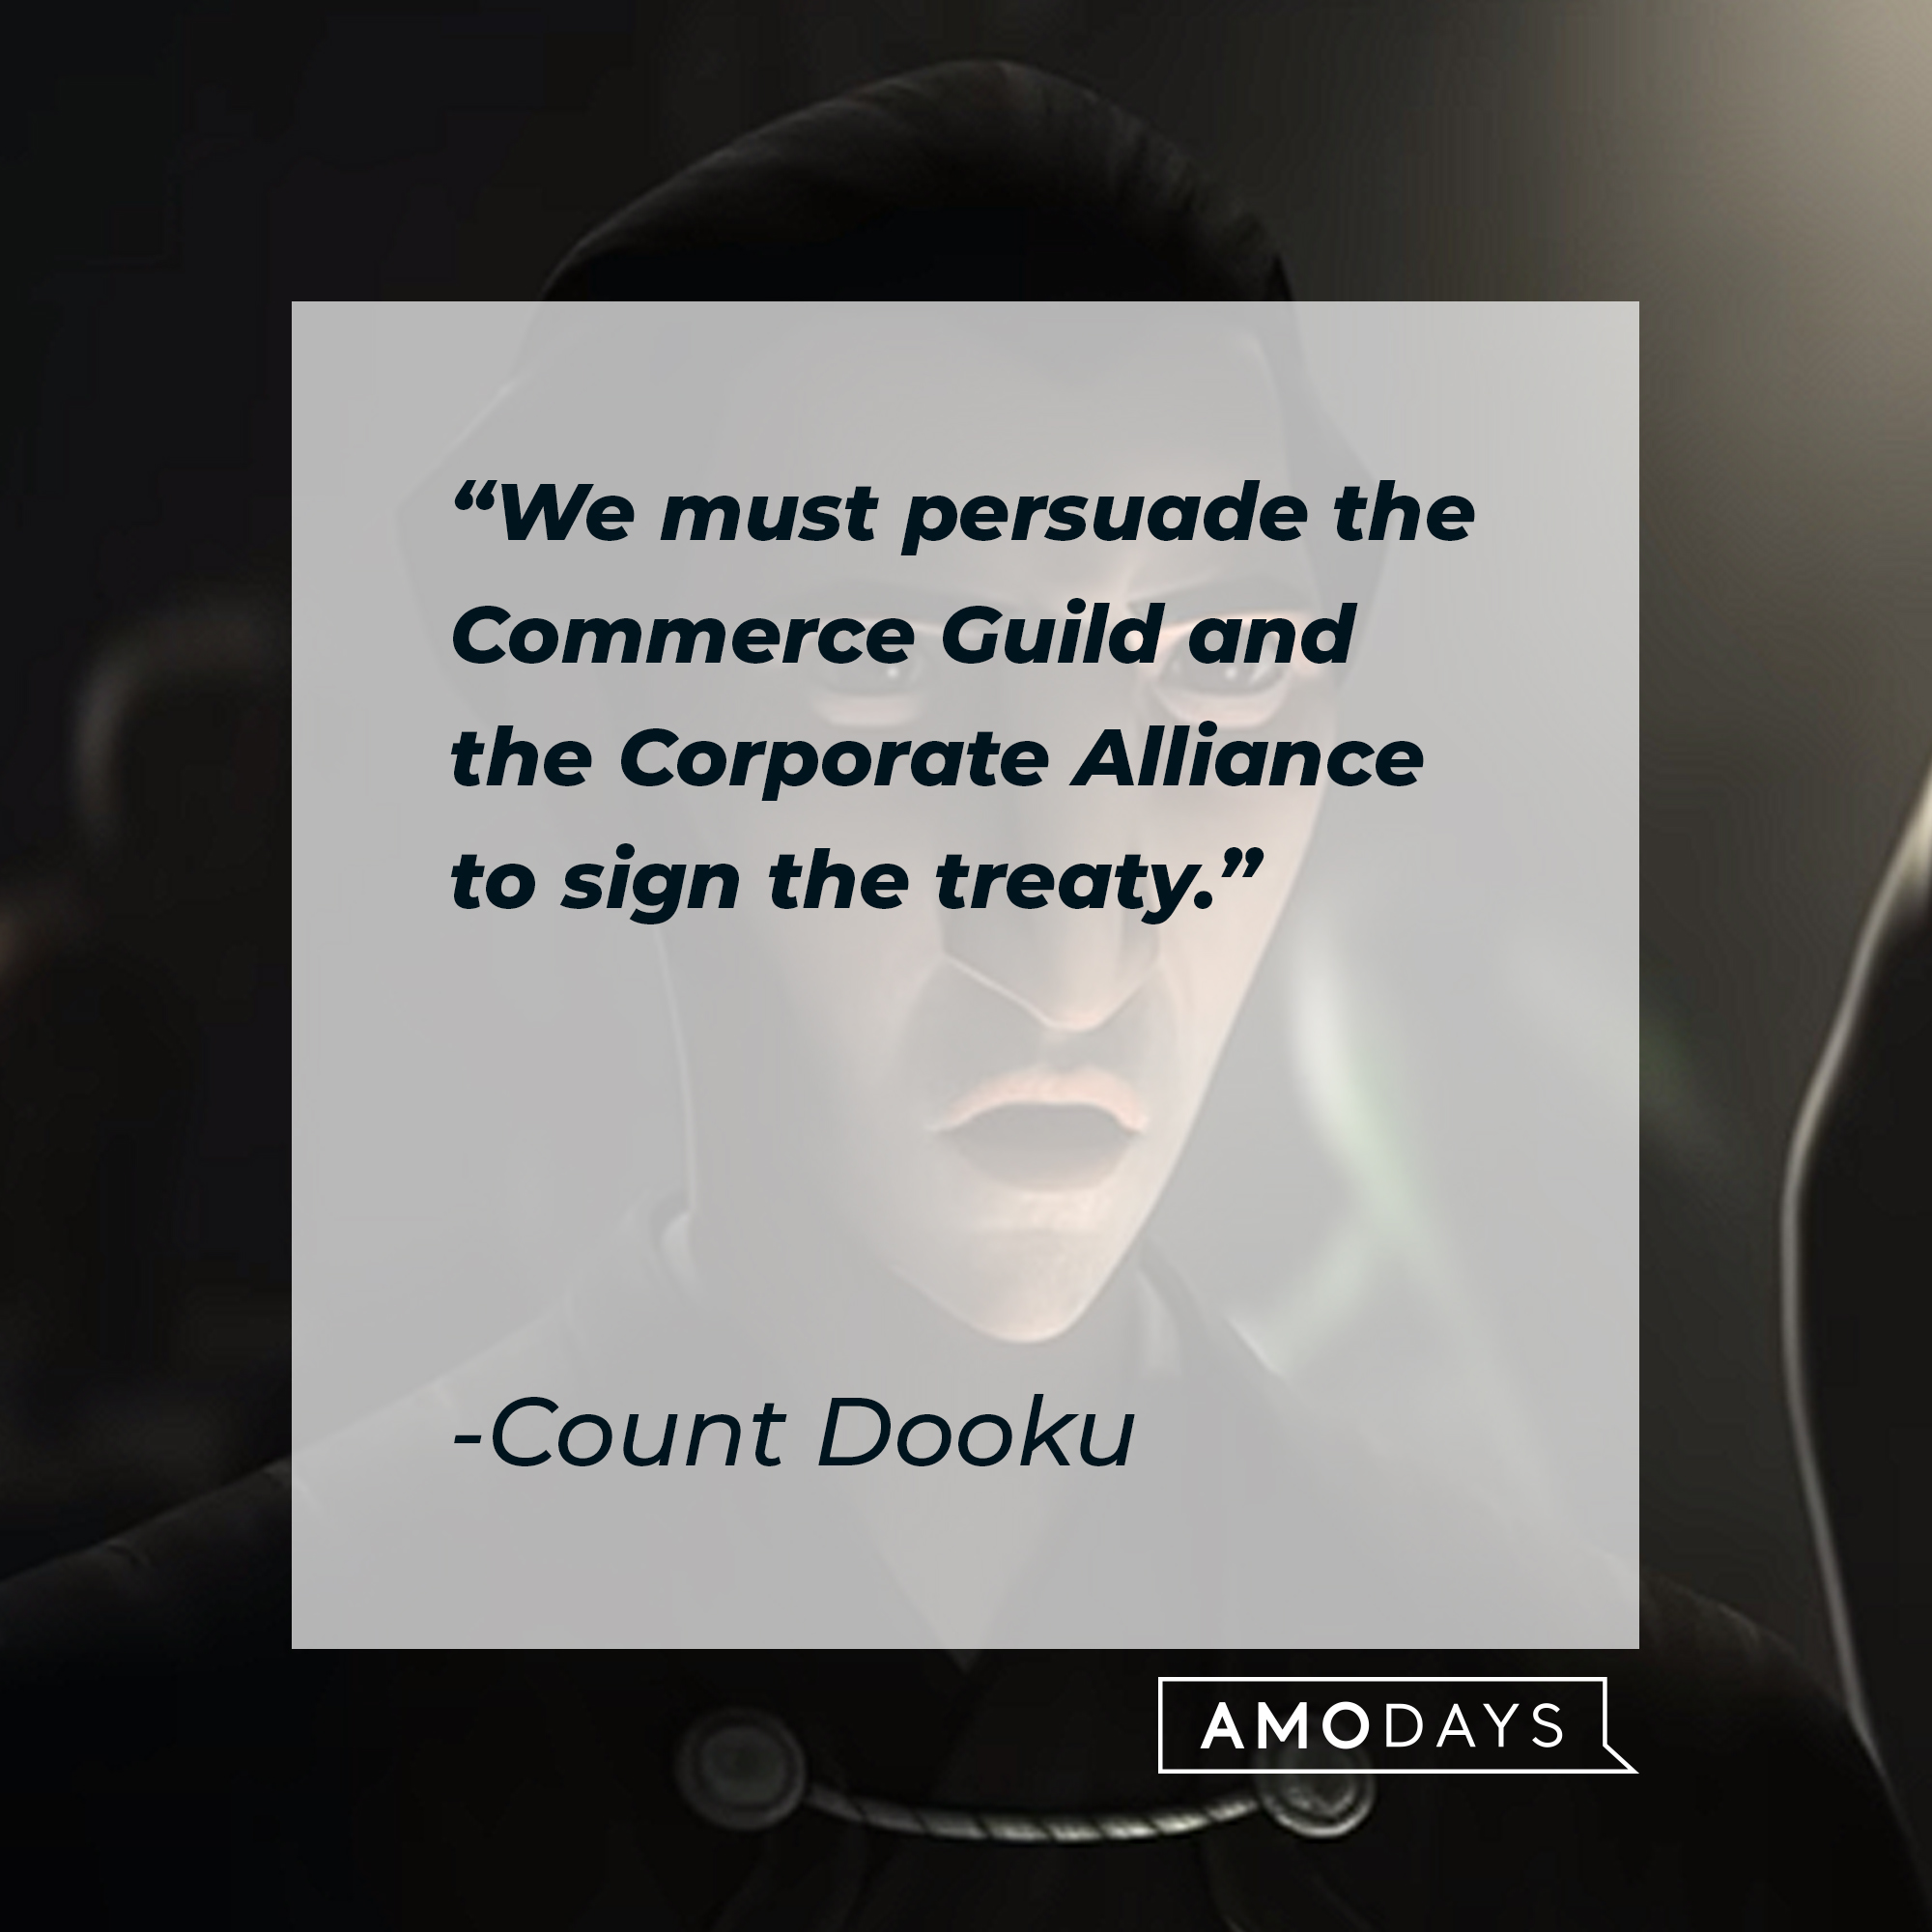 Count Dooku's quote: "We must persuade the Commerce Guild and the Corporate Alliance to sign the treaty." | Source: youtube.com/StarWars